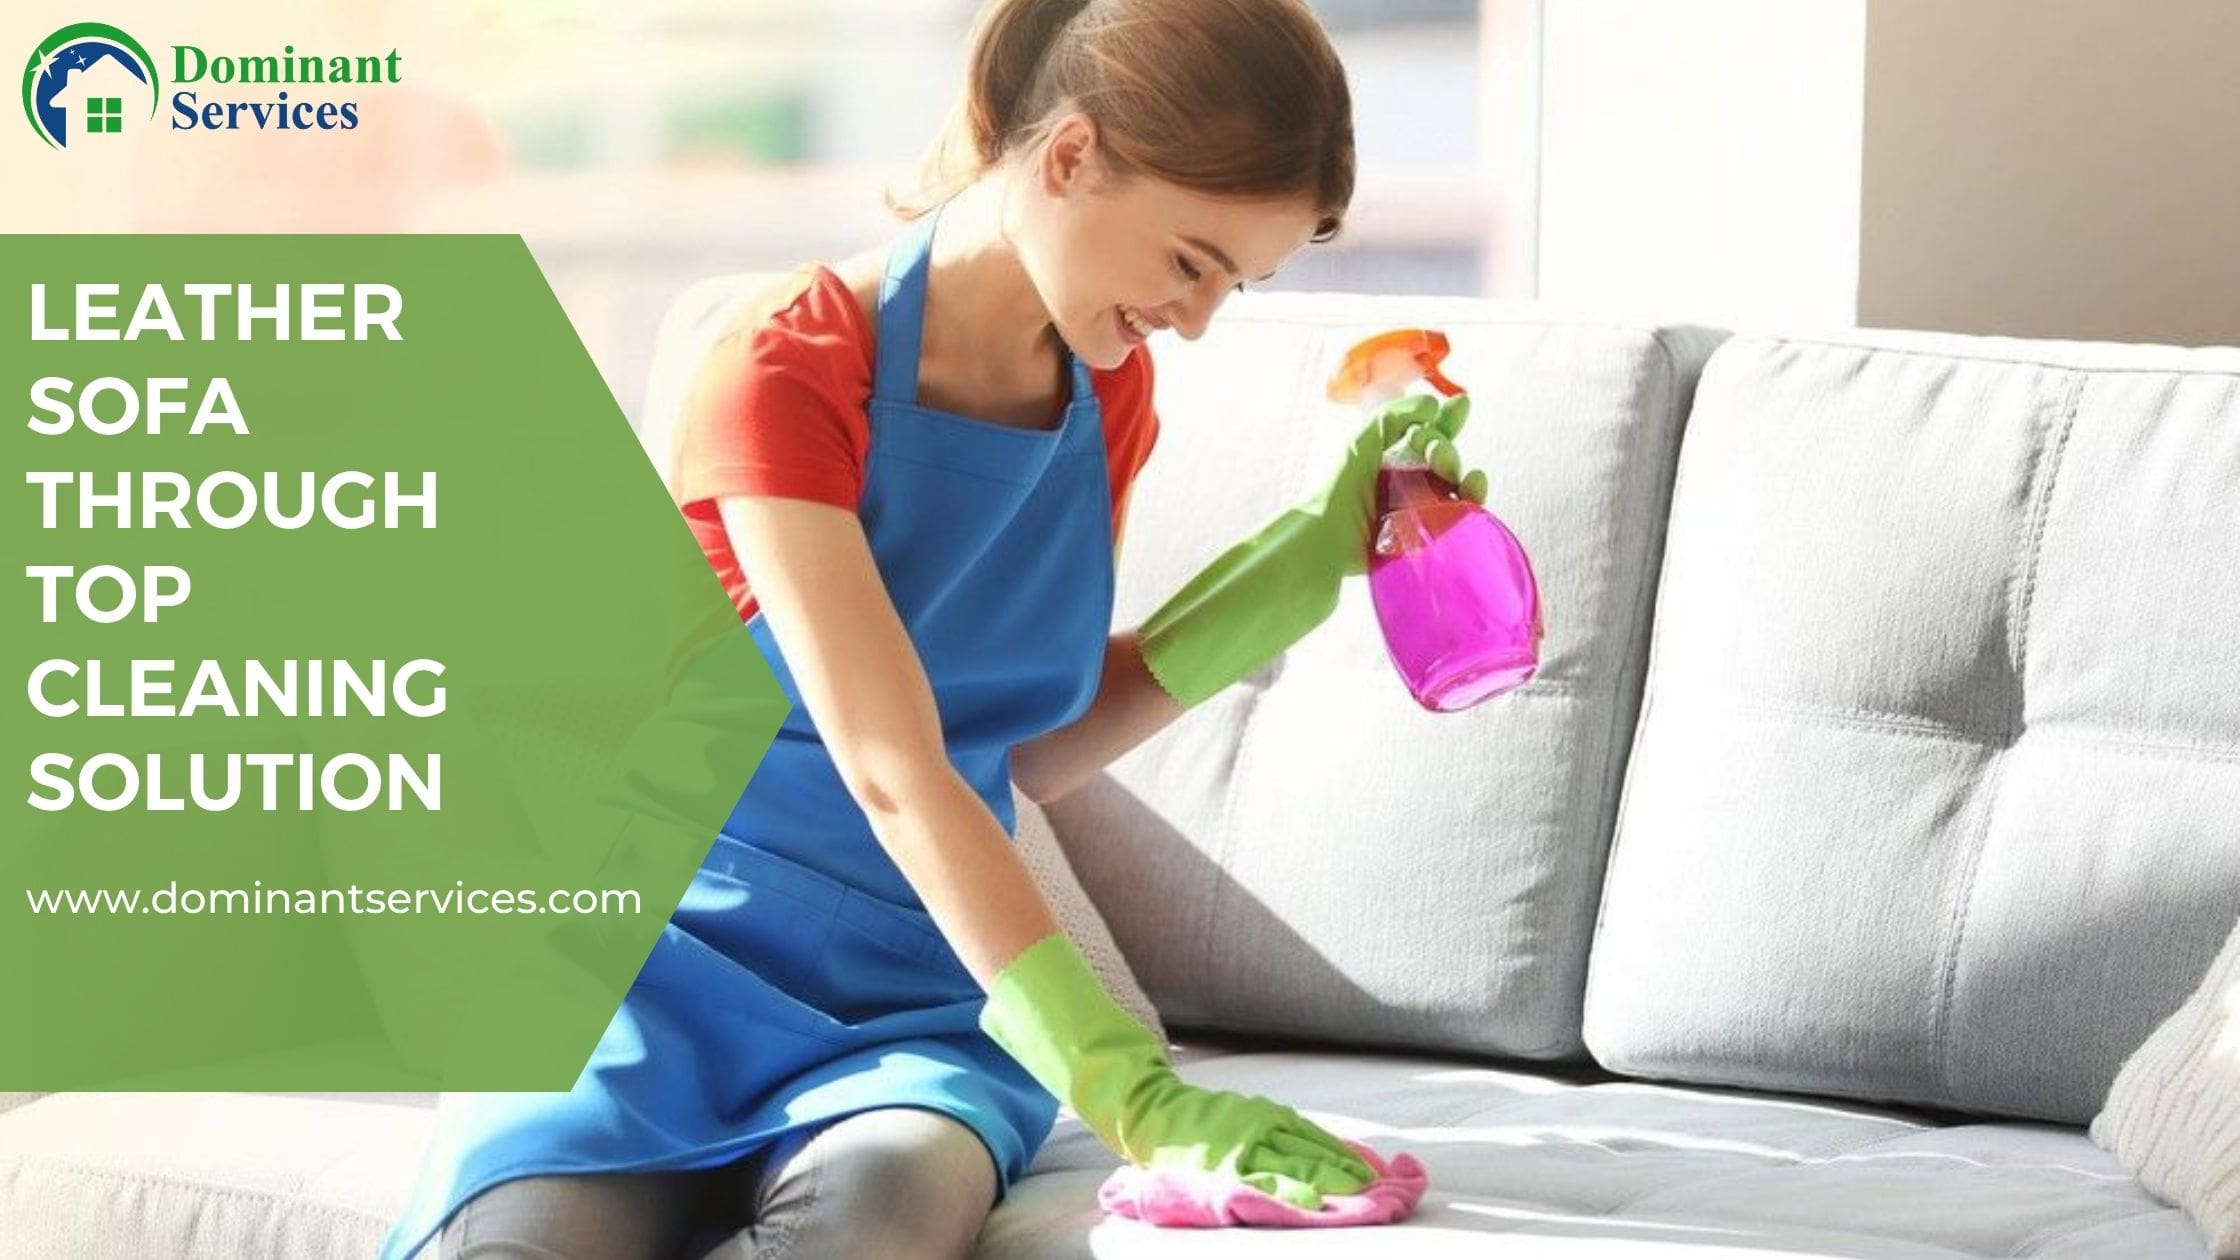 You are currently viewing Make Virus & Germs free you’re Leather Sofa through Top Cleaning Solution.